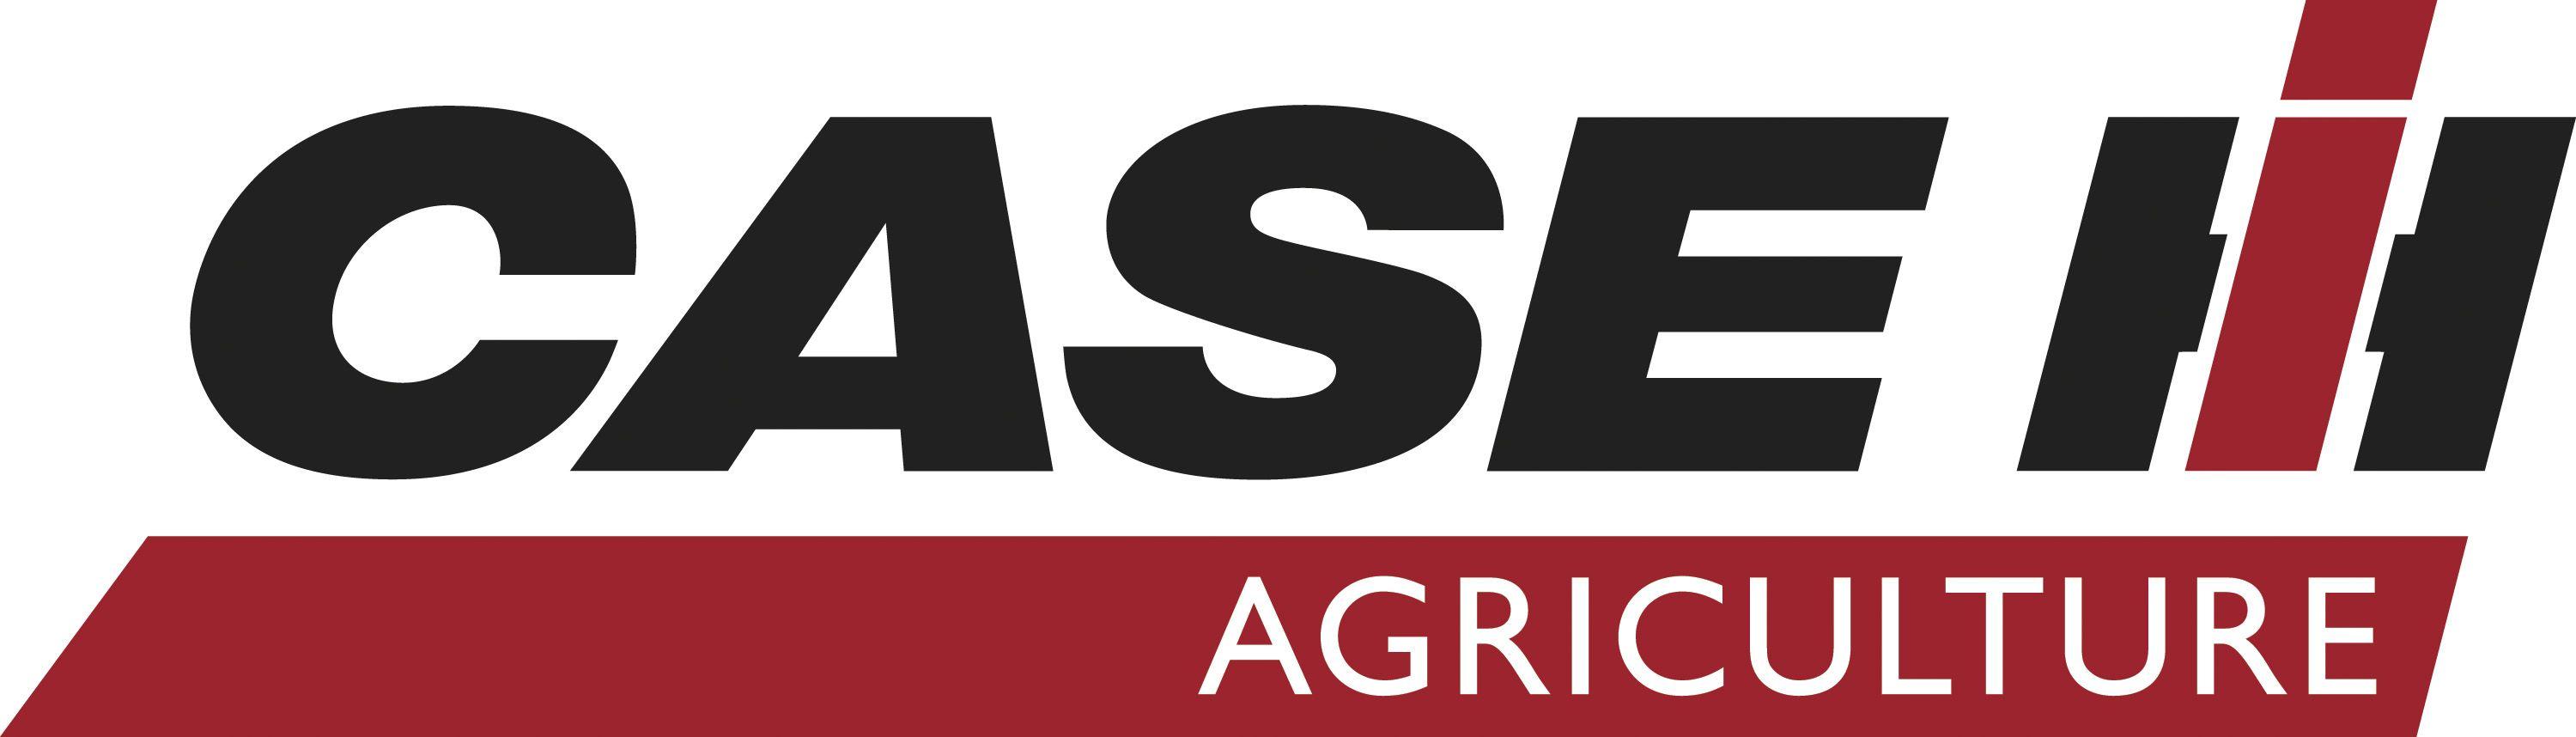 Case Agriculture Logo - About. International Harvester and Case IH. Case ih, Tractors, Country